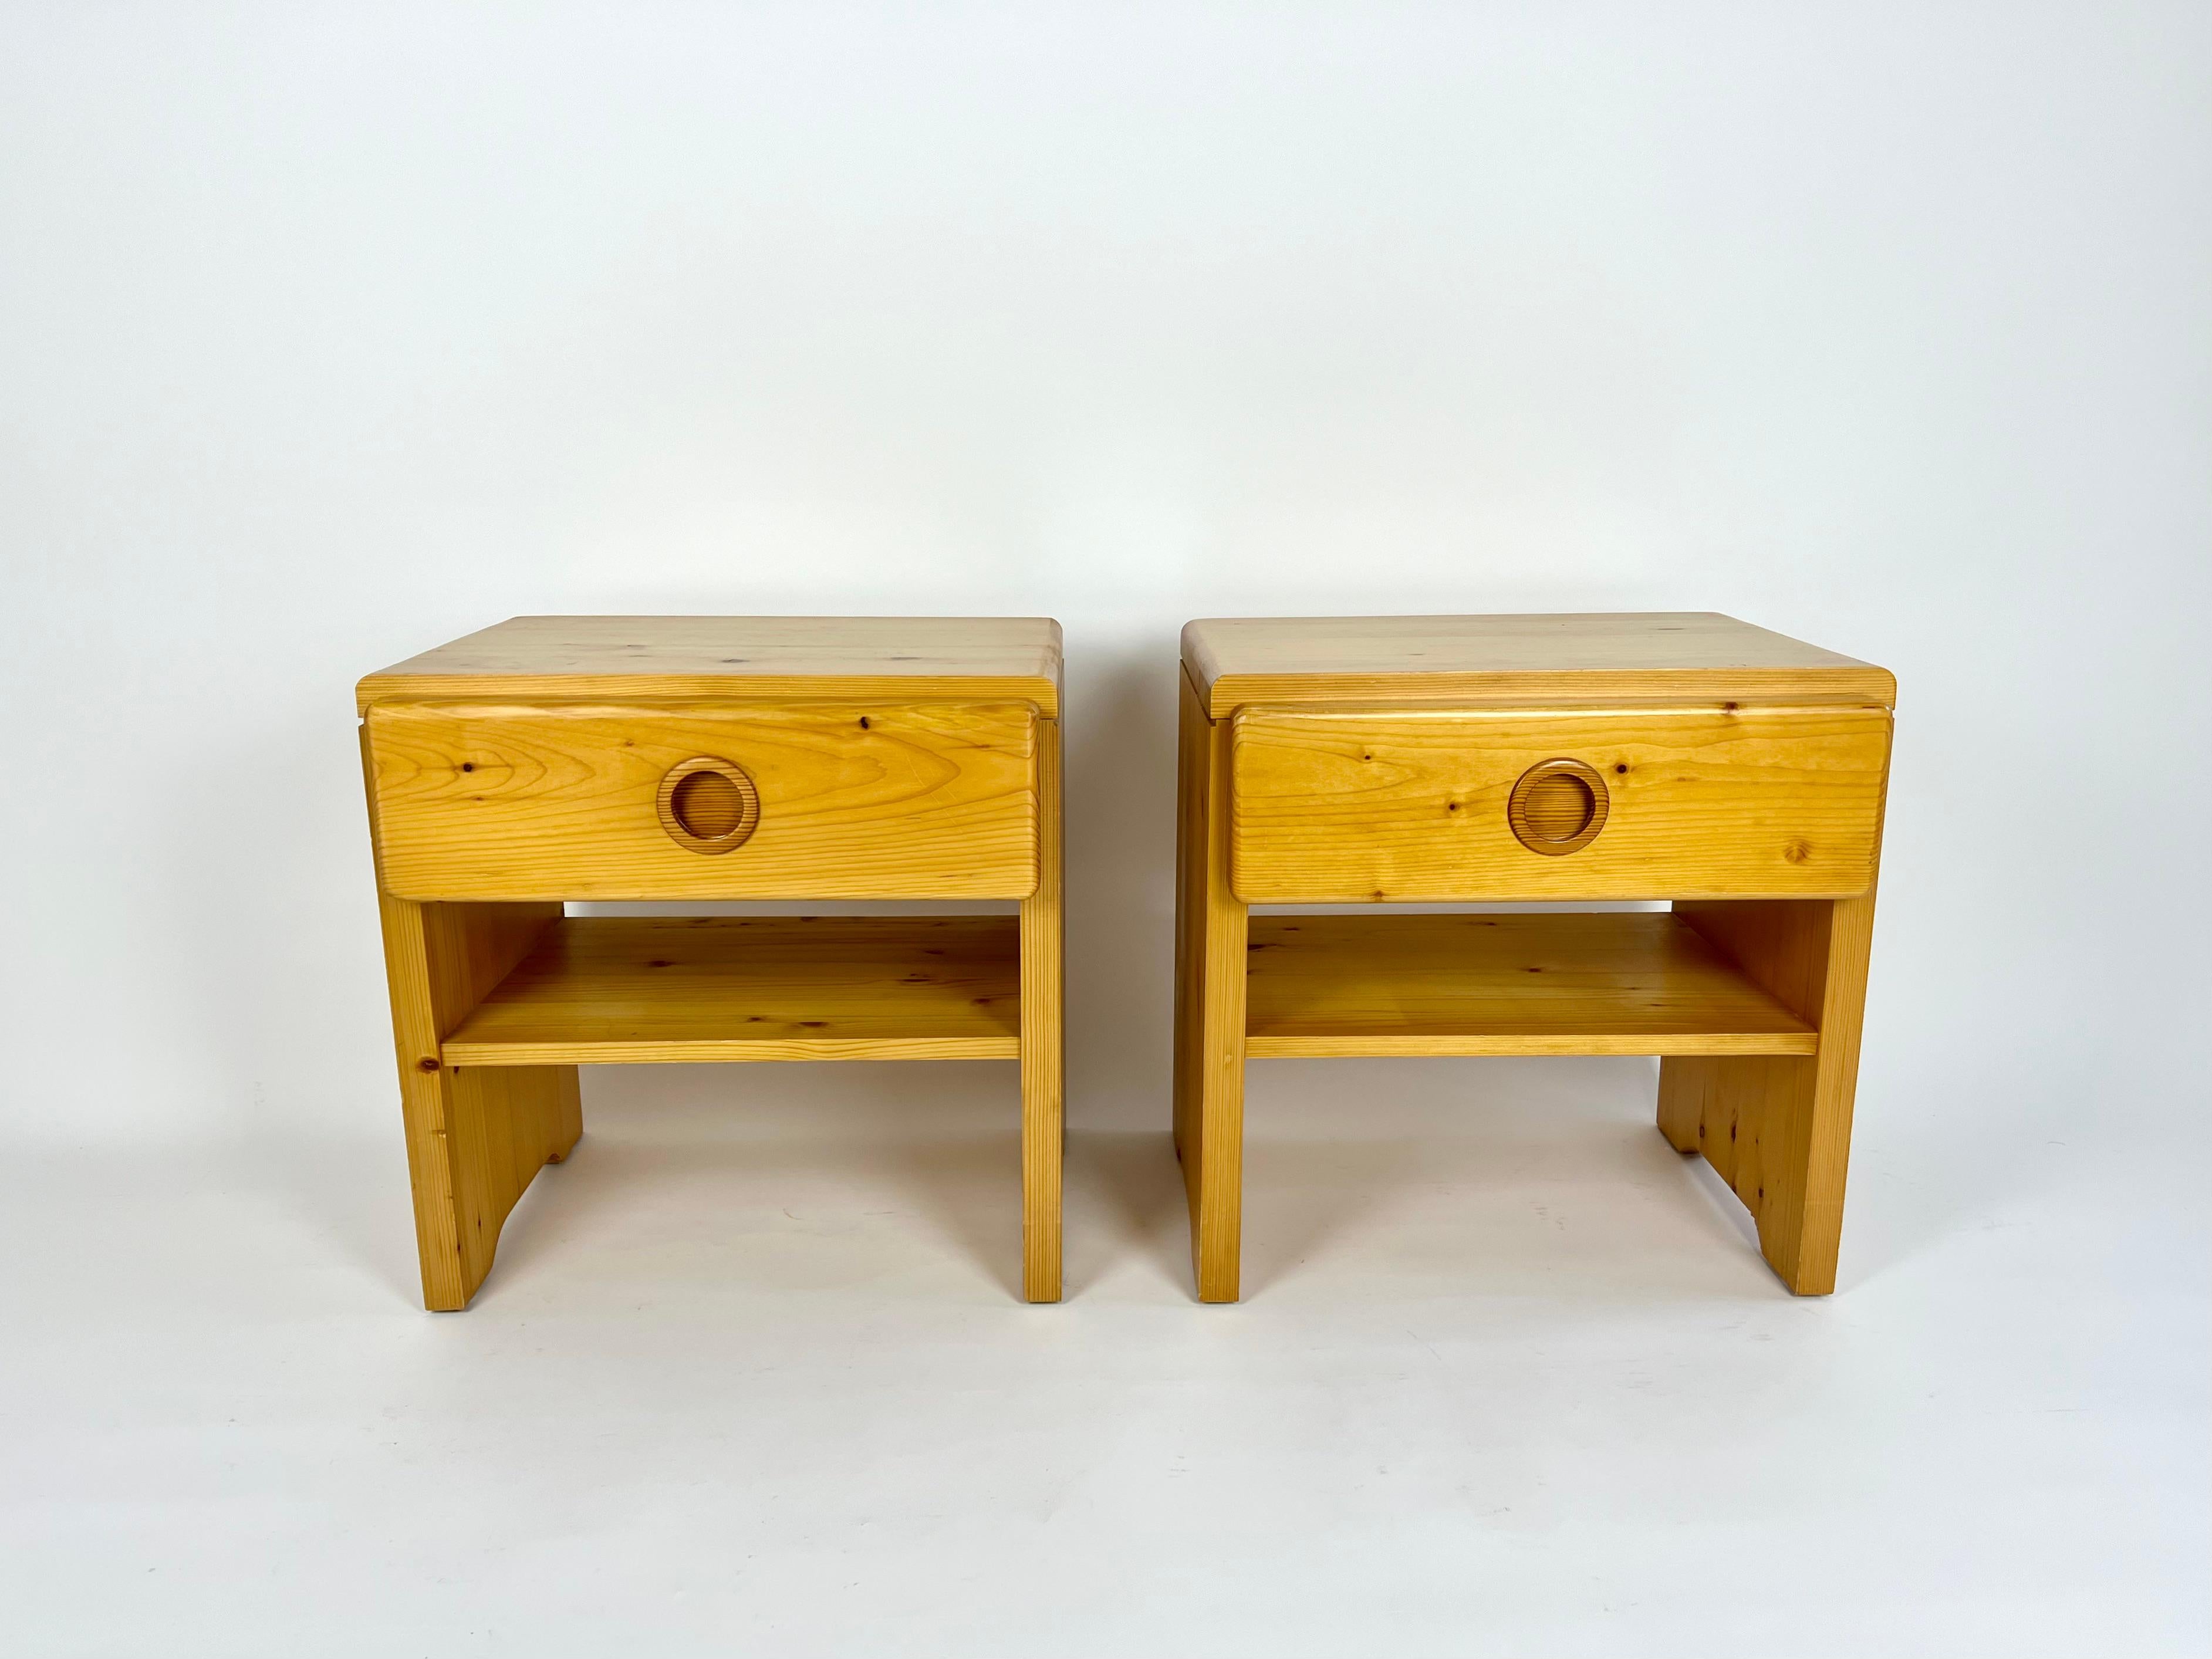 French Pair of vintage pine bedside tables from Les Arcs, France. Charlotte Perriand